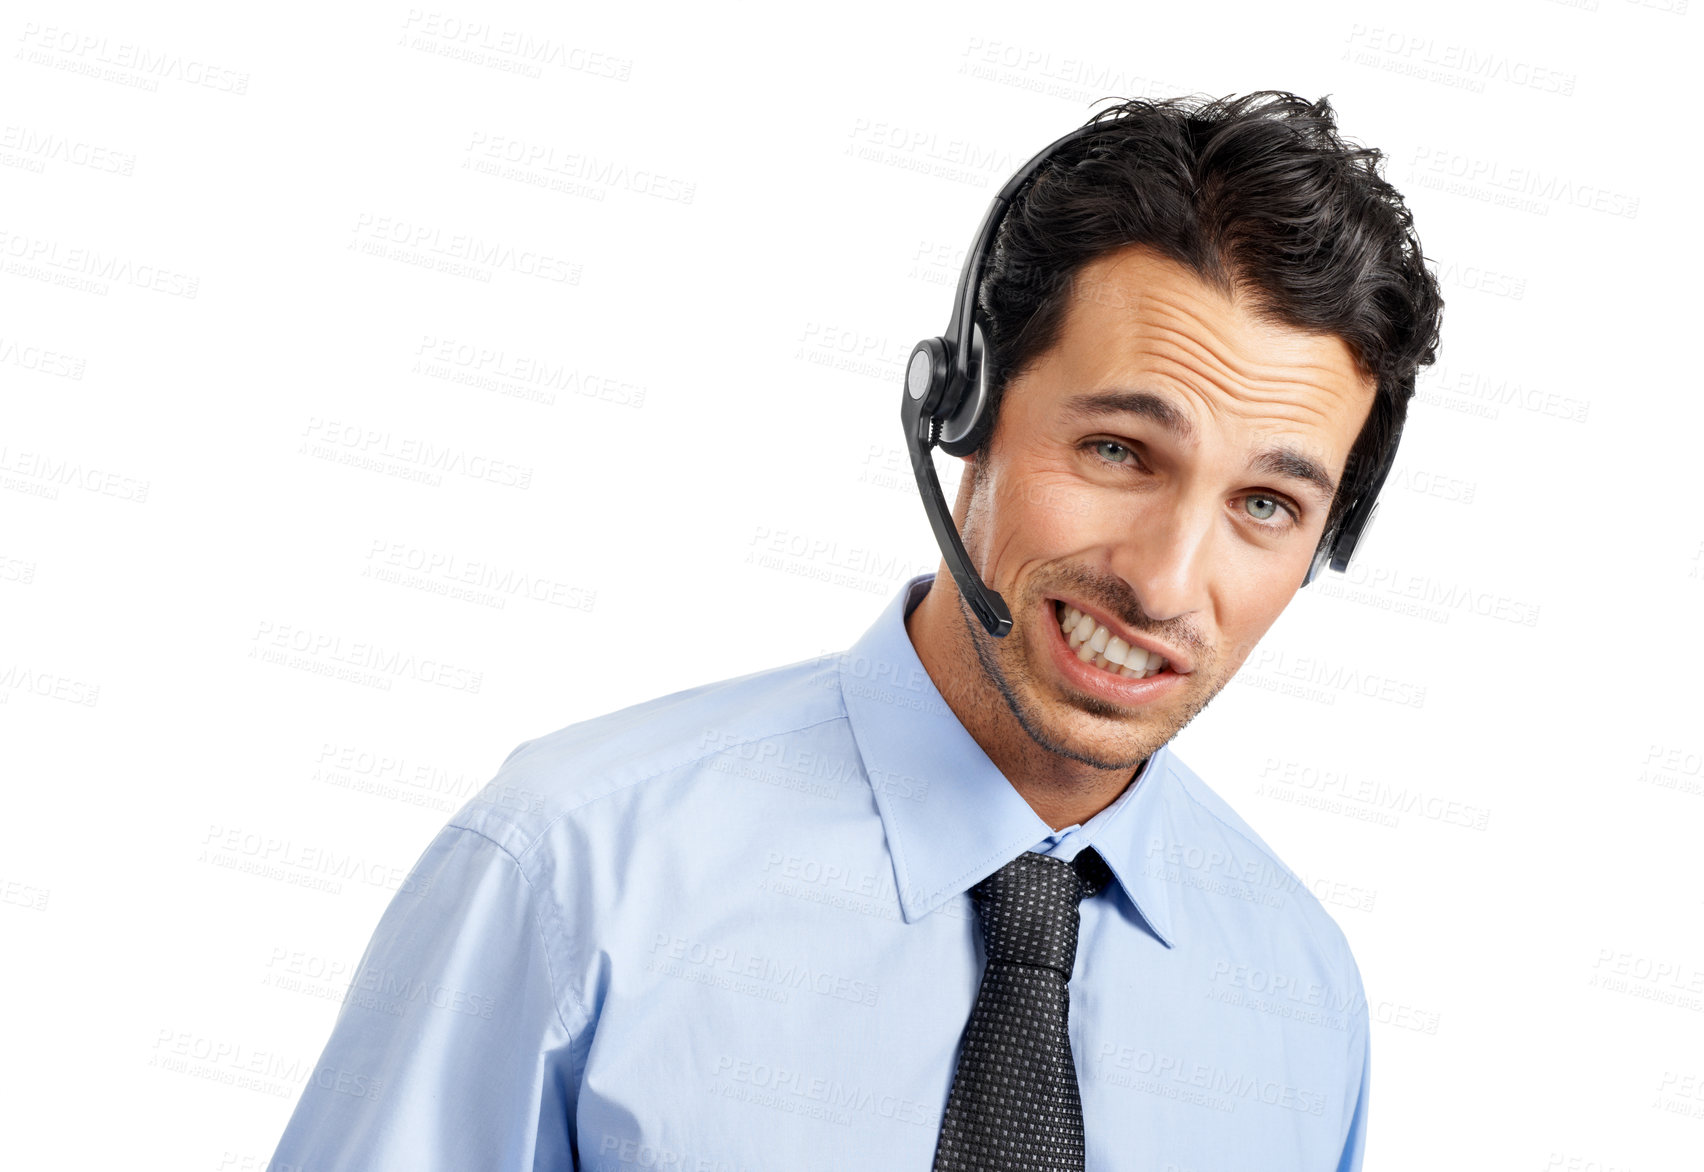 Buy stock photo Call center, oops face or funny man consulting on contact us CRM, telemarketing or telecom communication. Business portrait, customer service or customer support consultant talking about a mistake